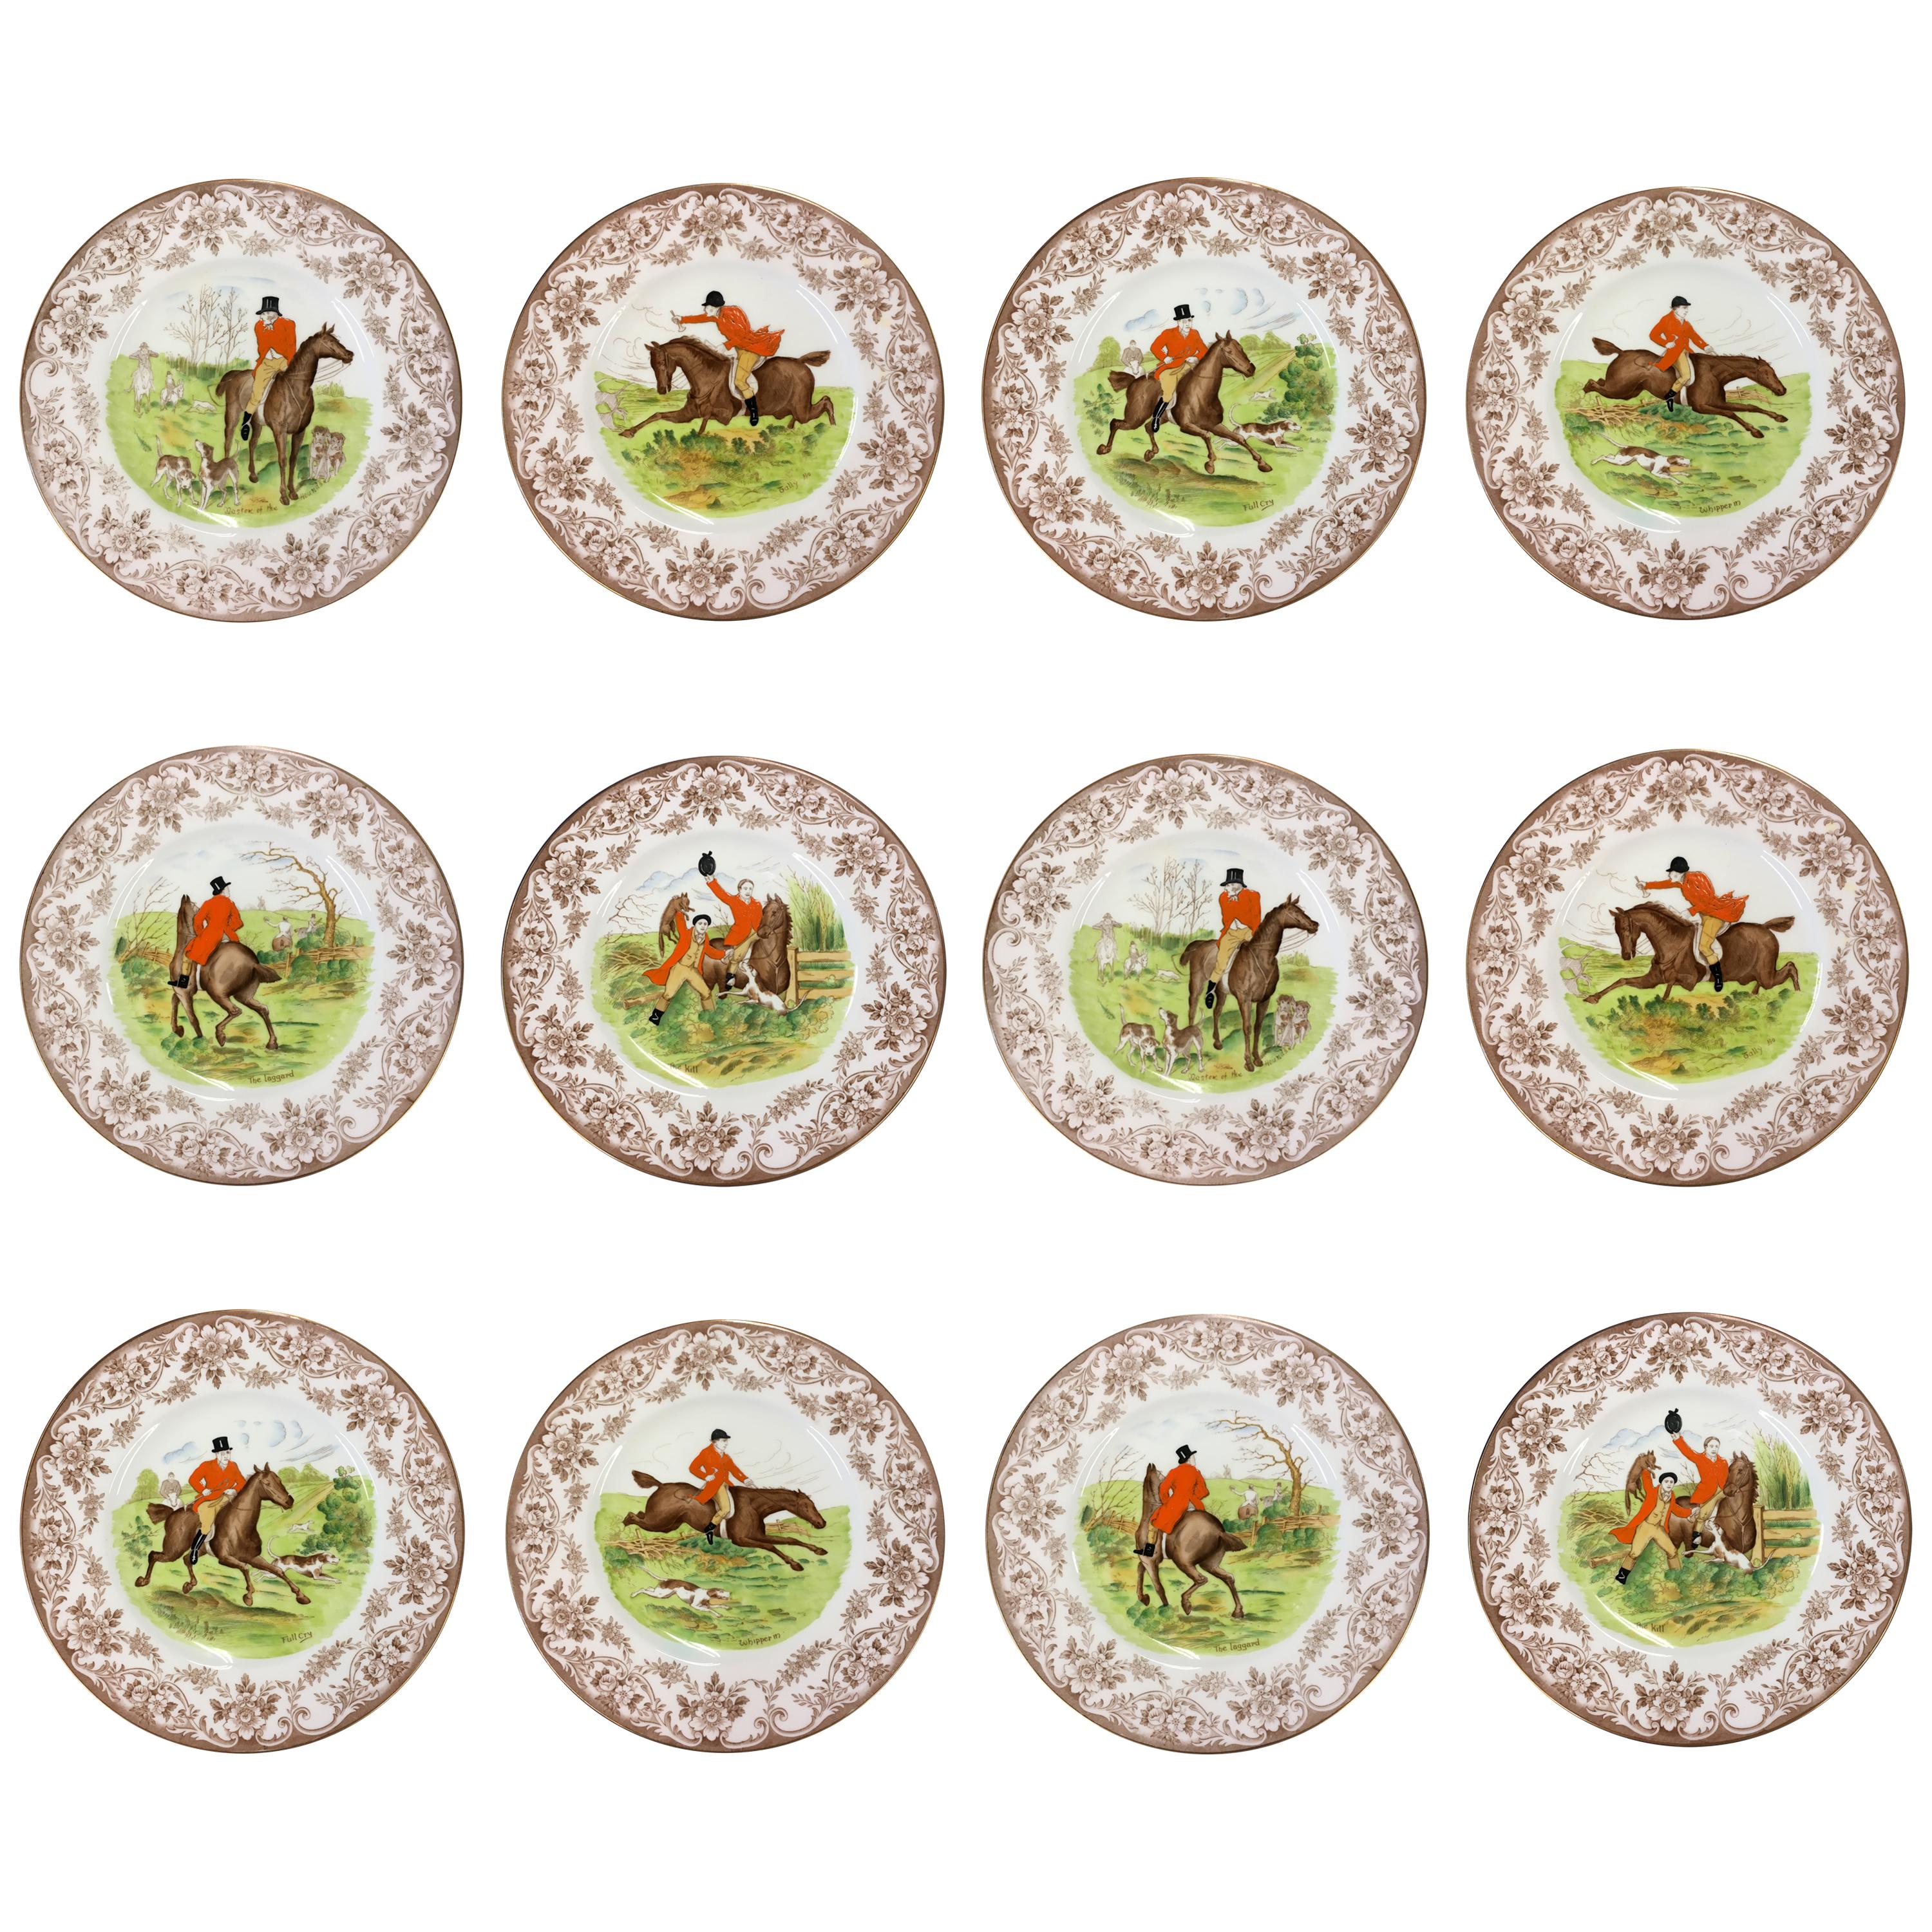 12 Wedgwood Hand-Painted Transferware "Patrician Hunt" Porcelain Display Plates For Sale